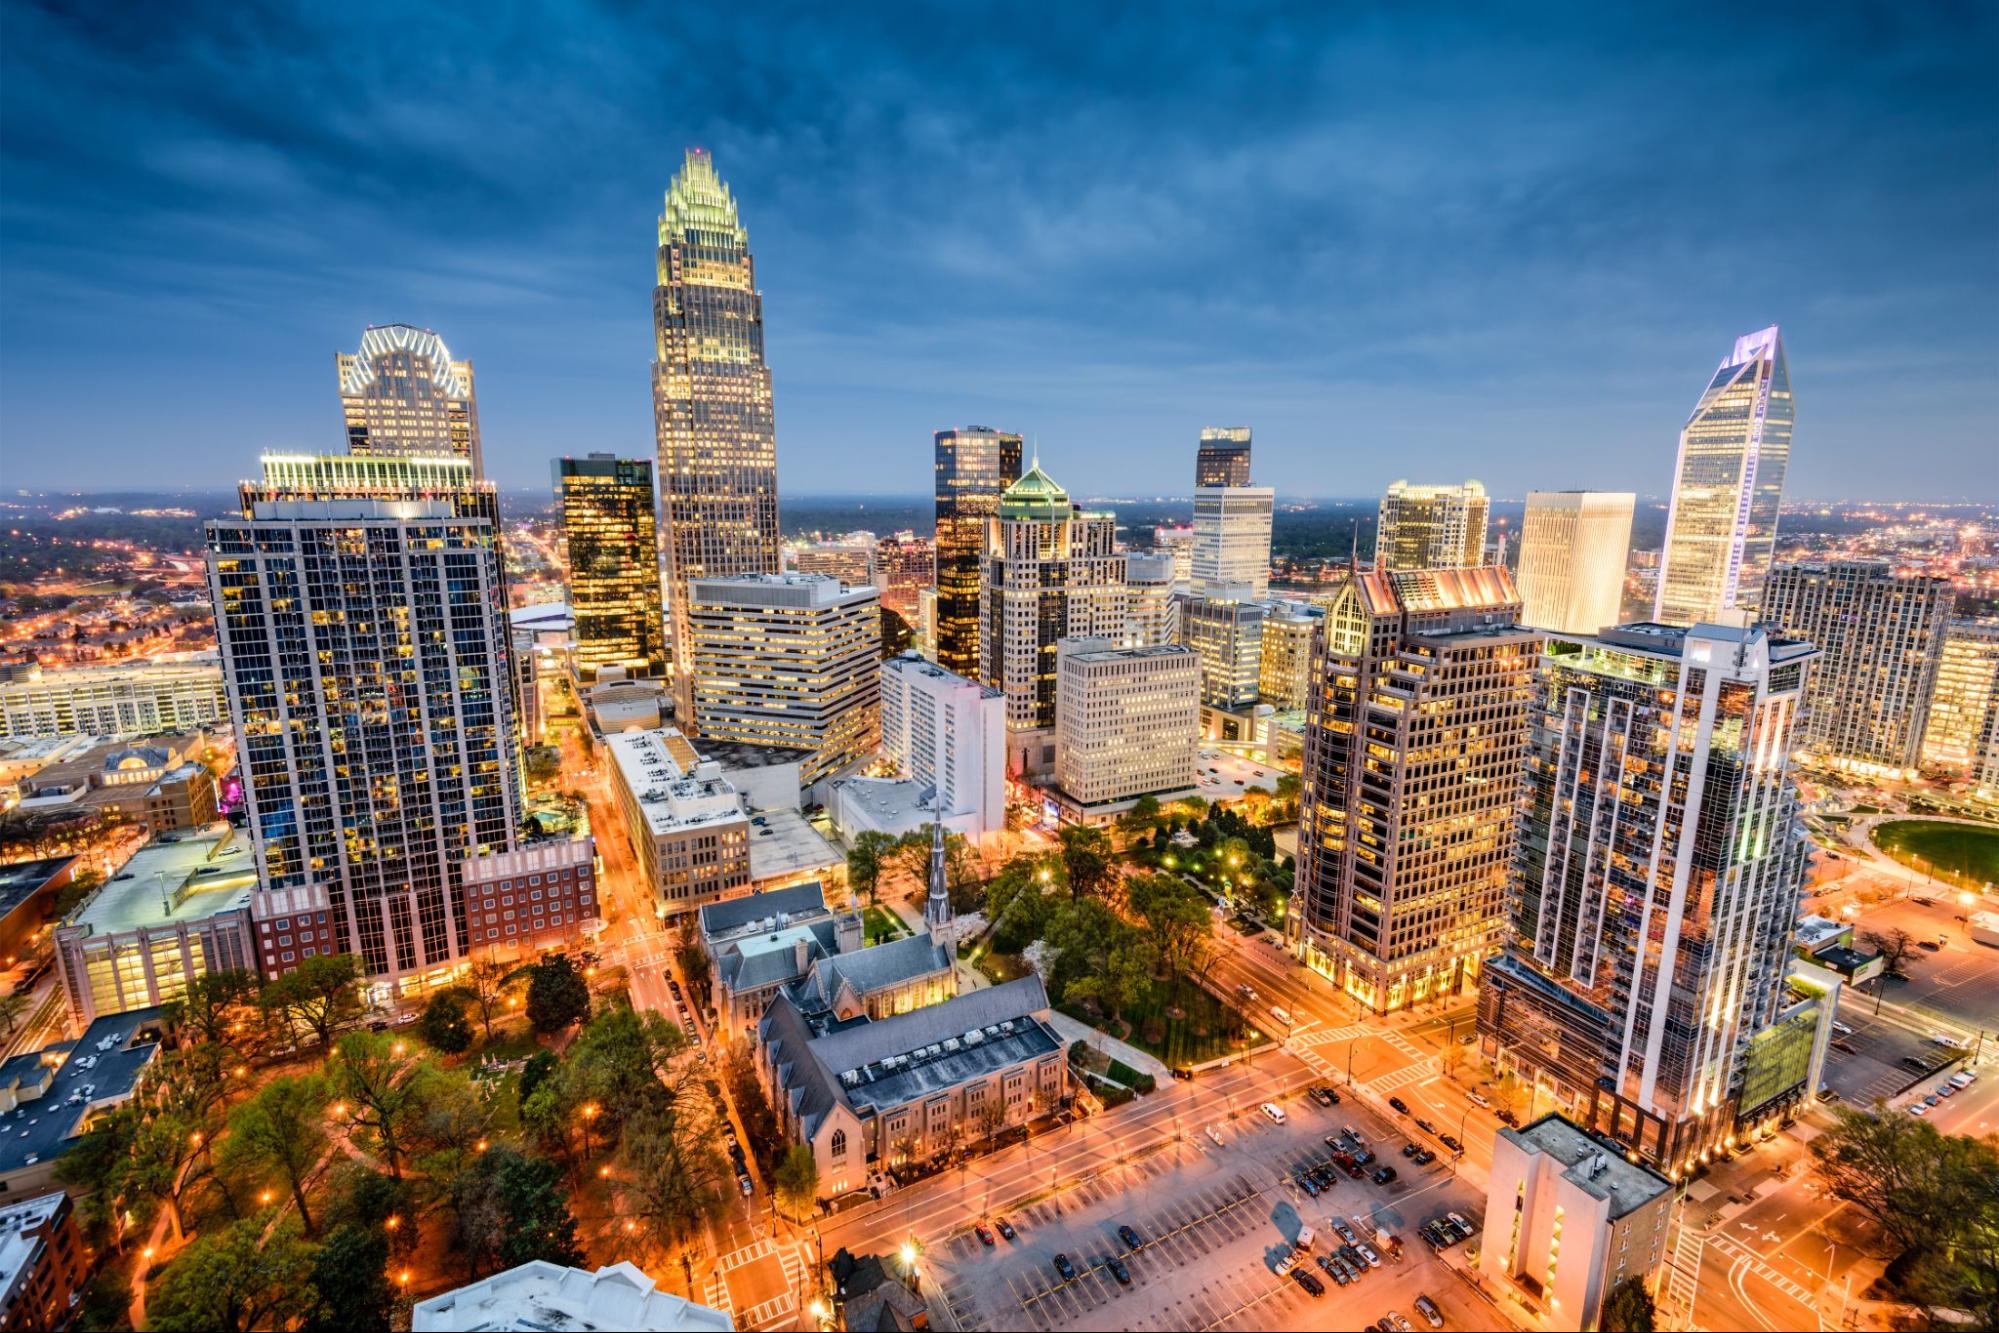 A birds-eye view of the city of Charlotte at nighttime.